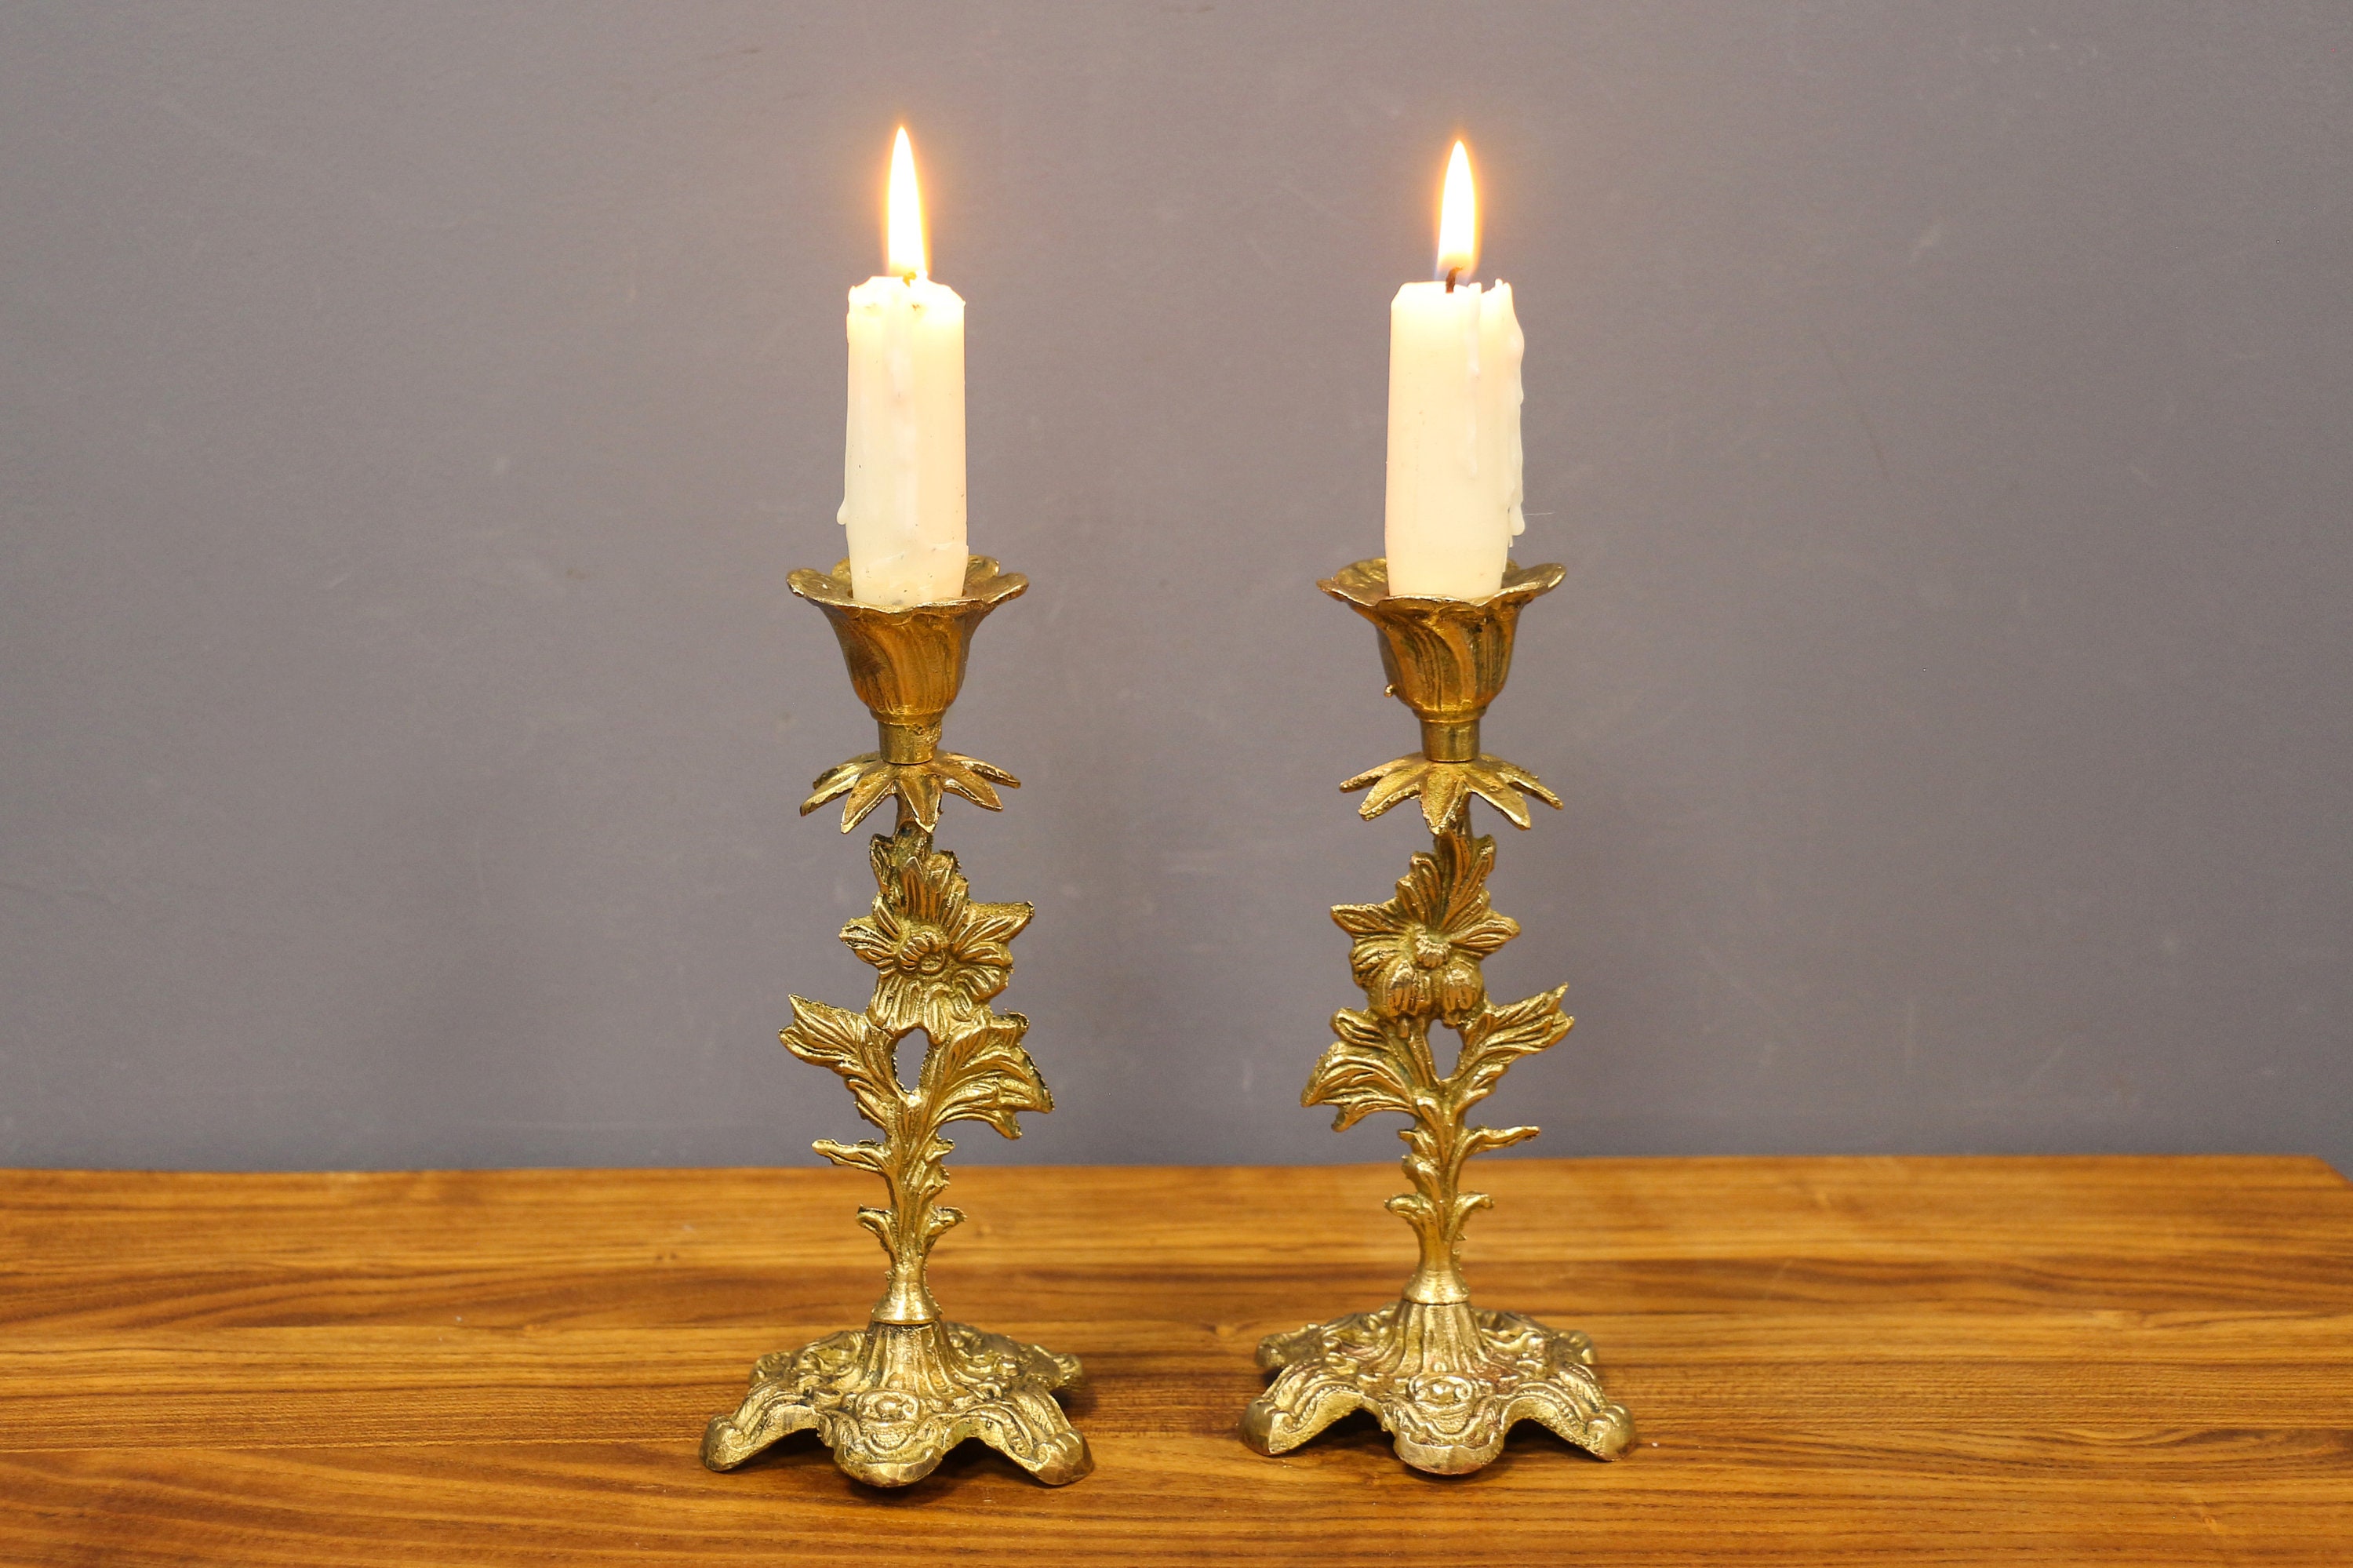 Antique Brass Ornate Pair Candlesticks, Art Nouveau French Candelabras,  Embossed Leaf Two Candle Holders, Brass Small Elegant Candlesticks. 